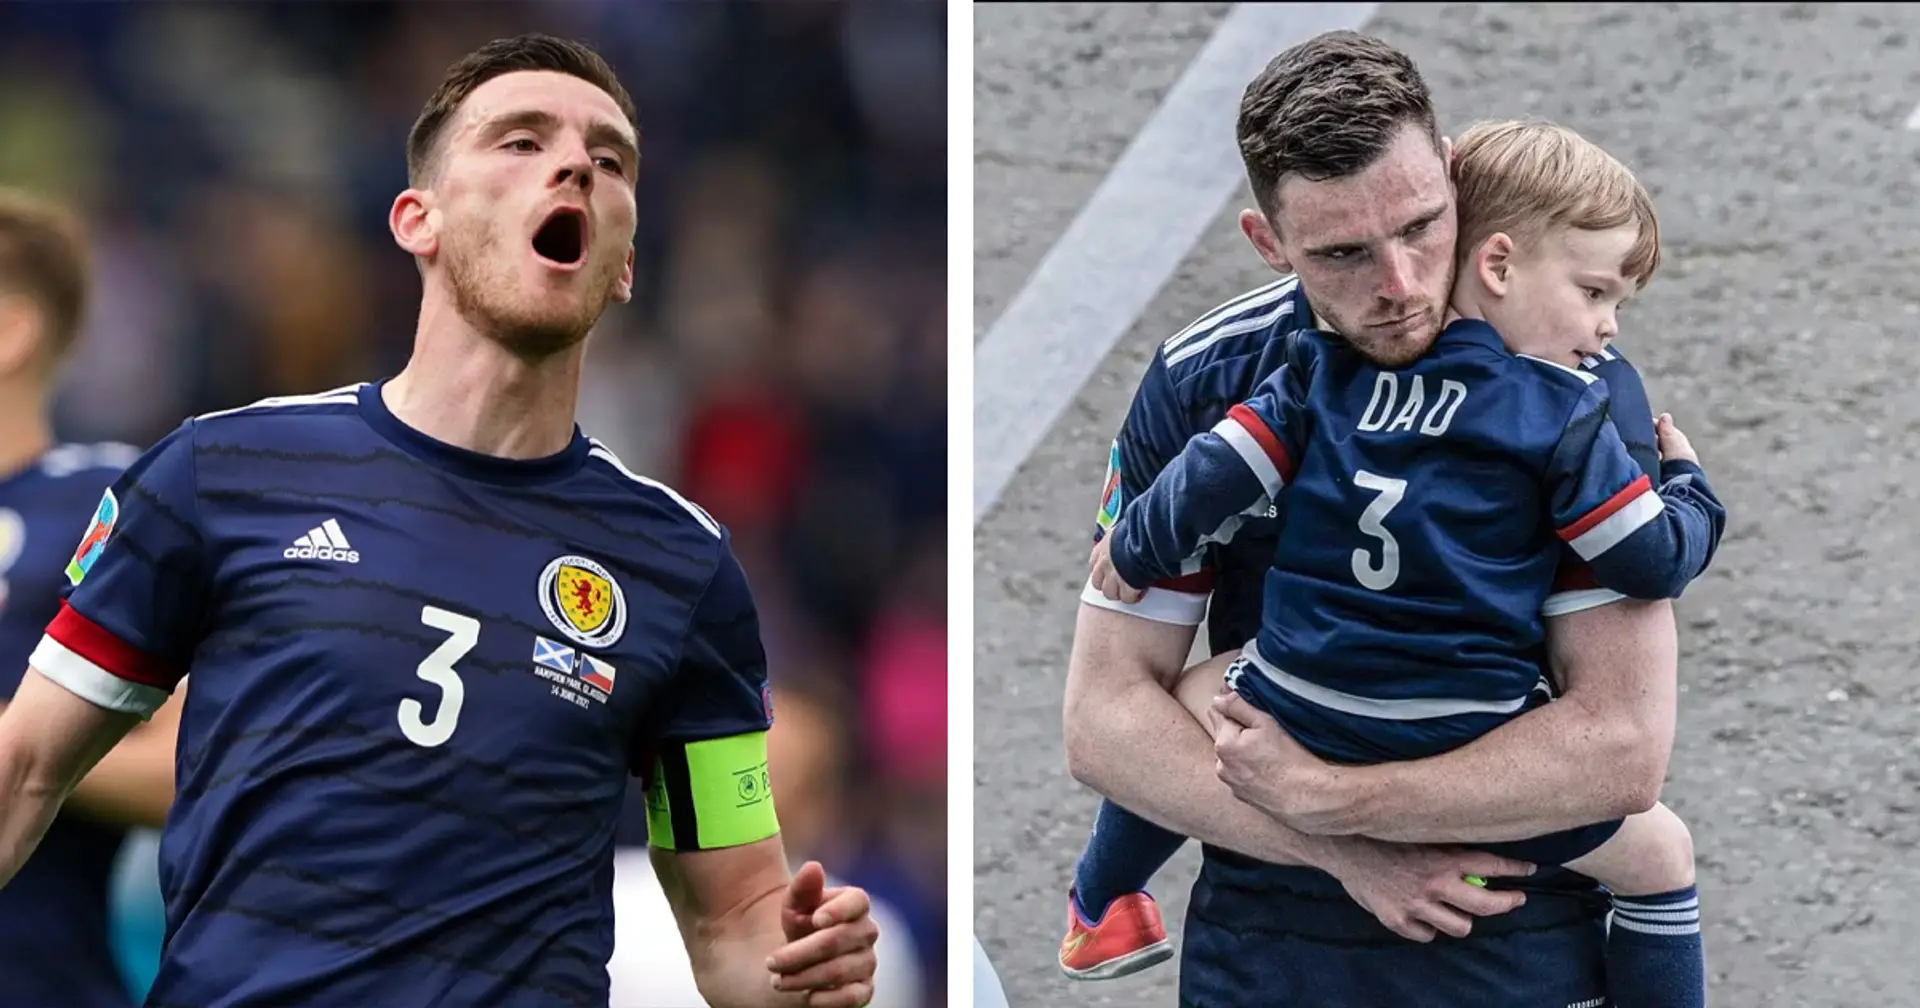 Emotional scenes as Andy Robertson is consoled by his little son after Scotland's defeat to Czech Republic